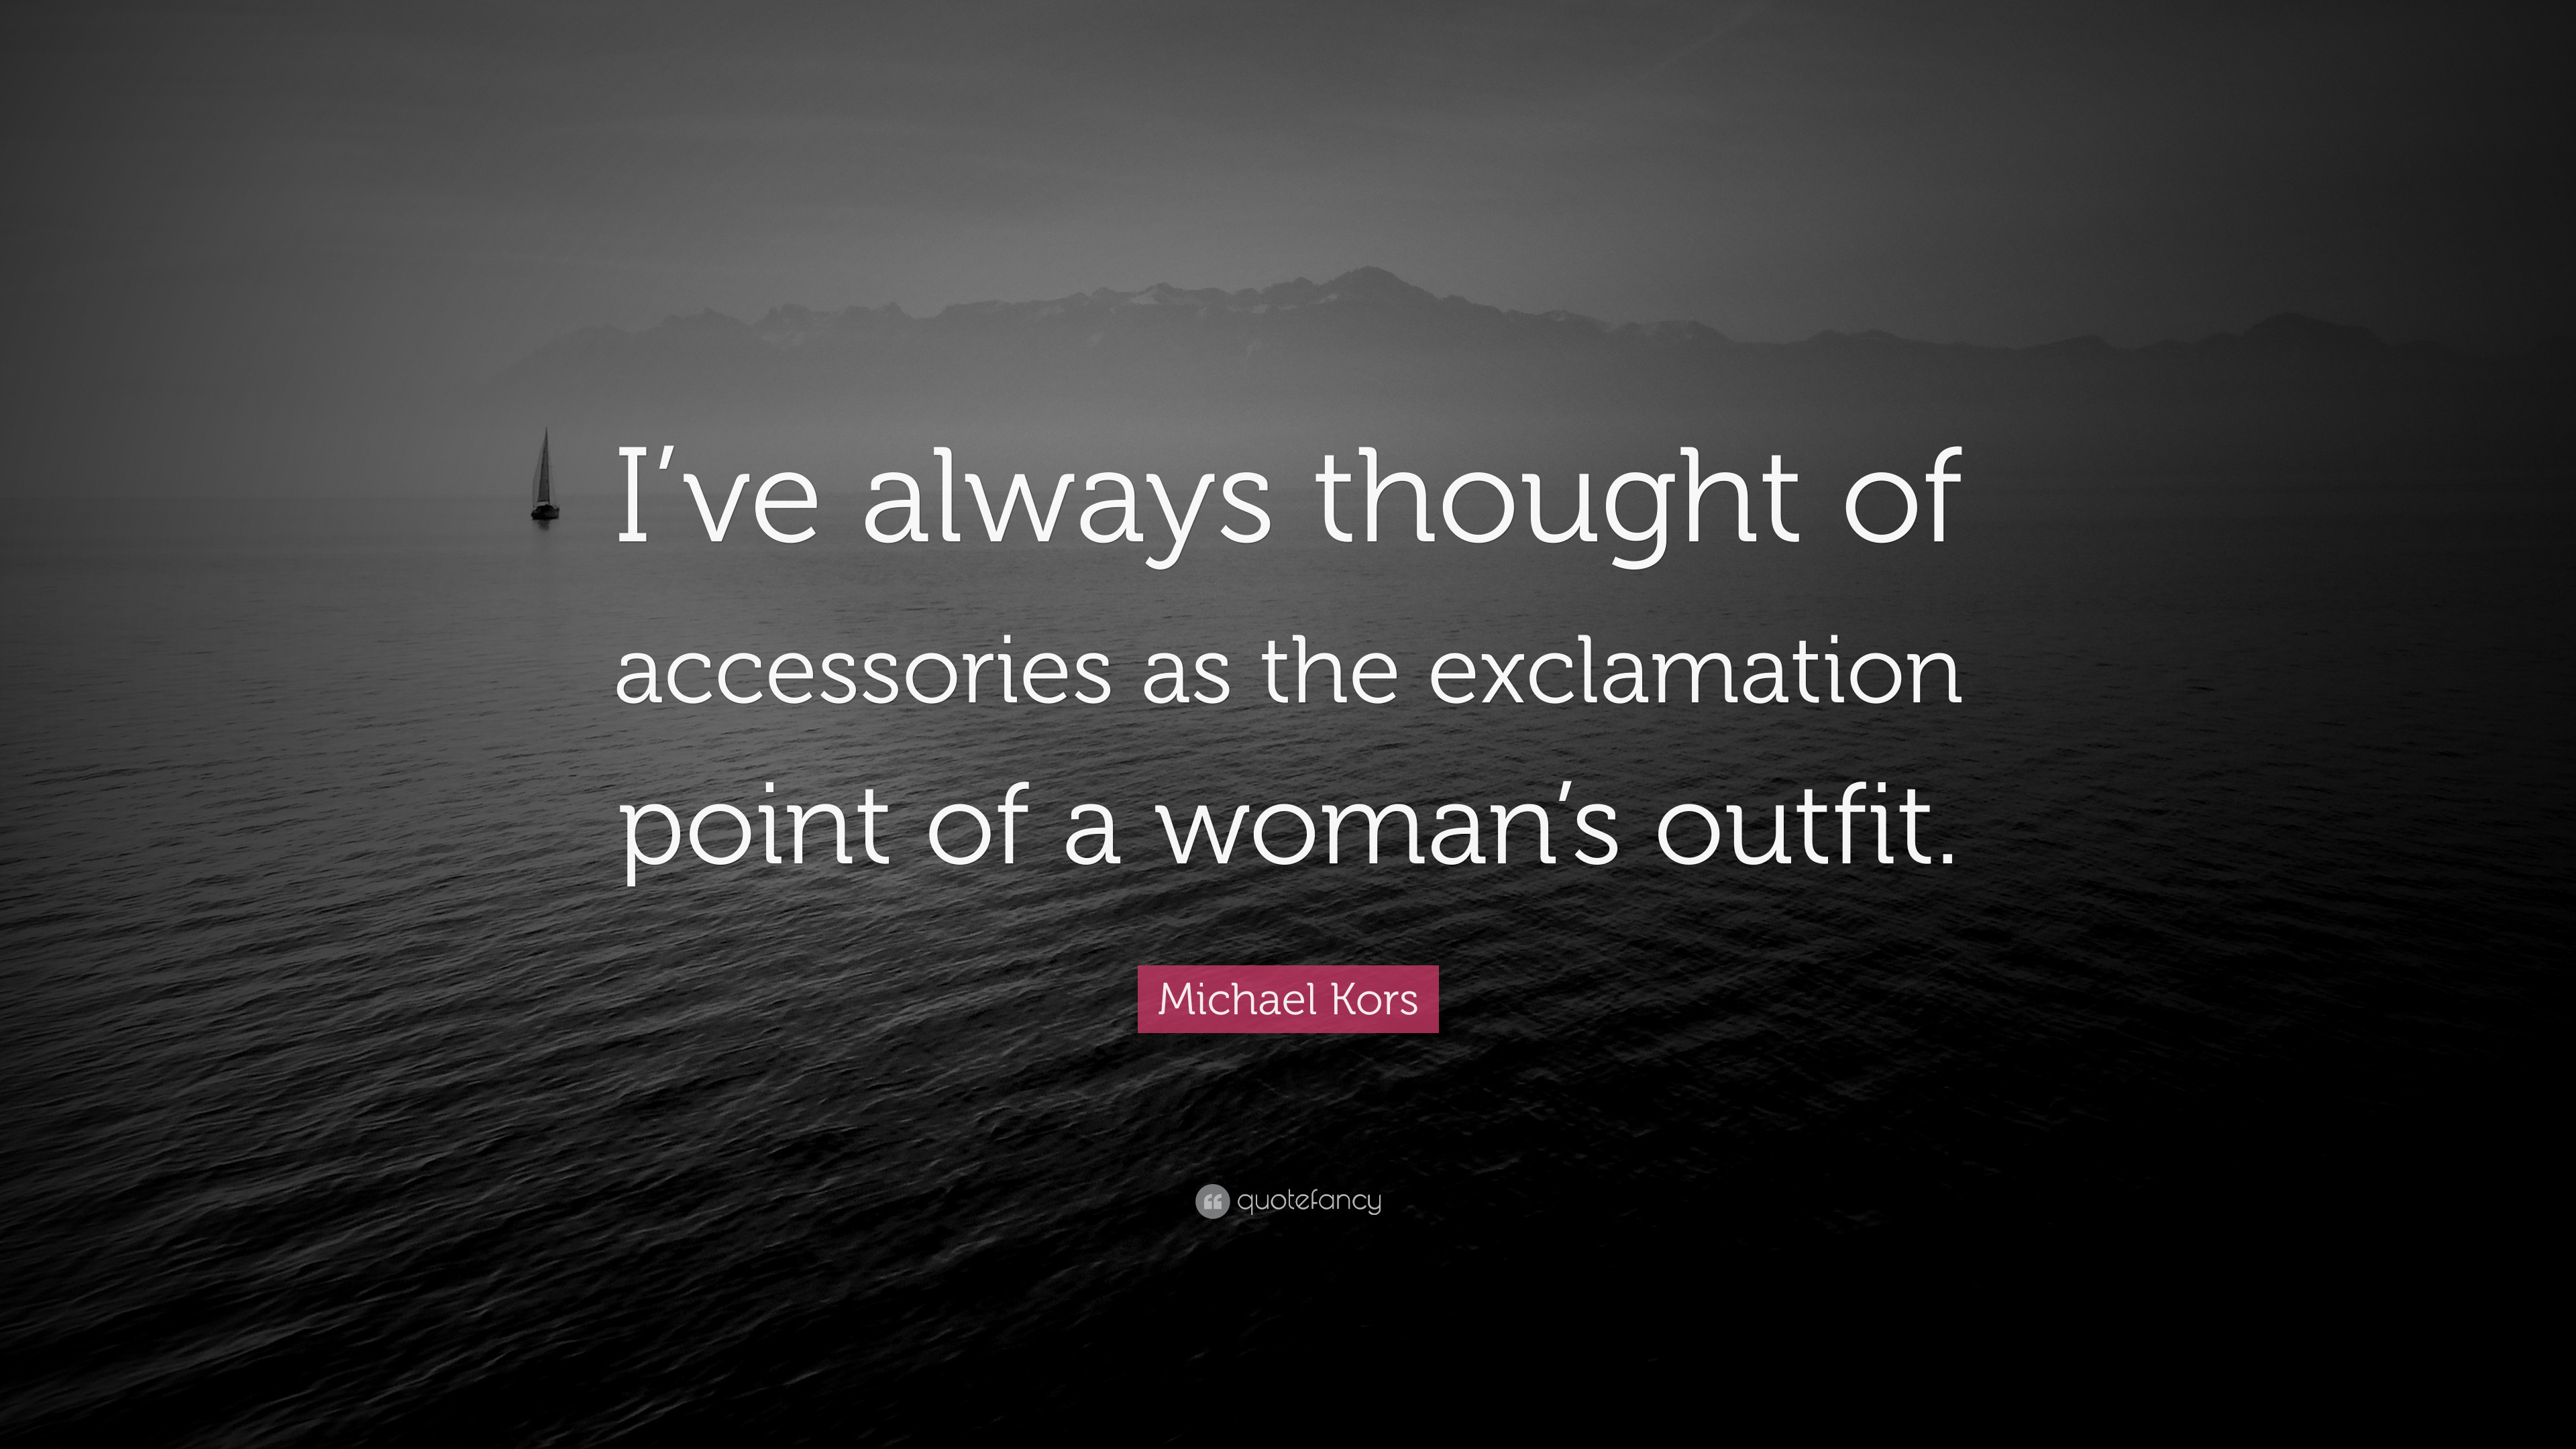 3840x2160 Michael Kors Quote: “I've always thought of accessories as the exclamation  point